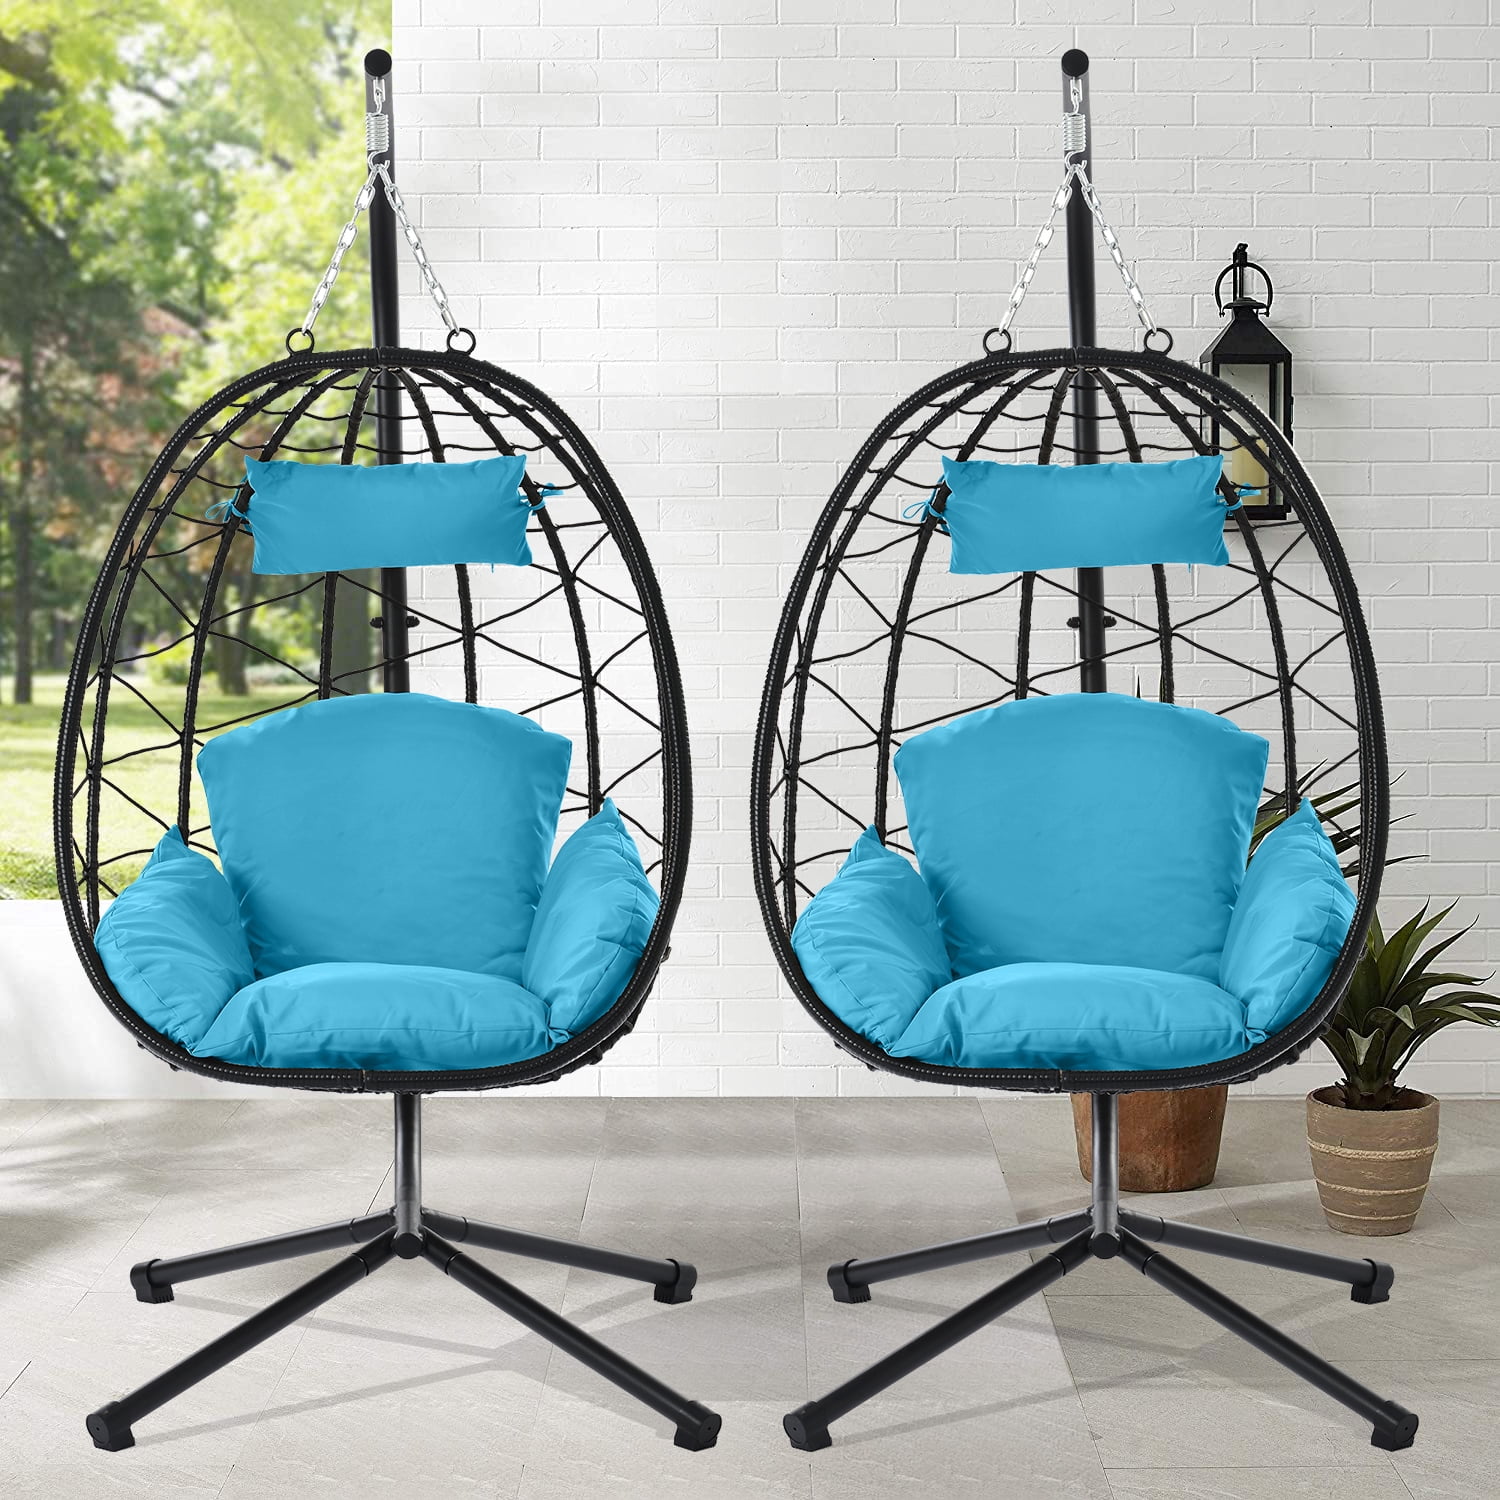 Egg Chair Outdoor Basket Chairs - 2 PC Wicker Patio Cuddle Chair with  Cushions Rattan Tear Drop Egg Cocoon Chair for Indoor Bedroom Outside Porch  Deck